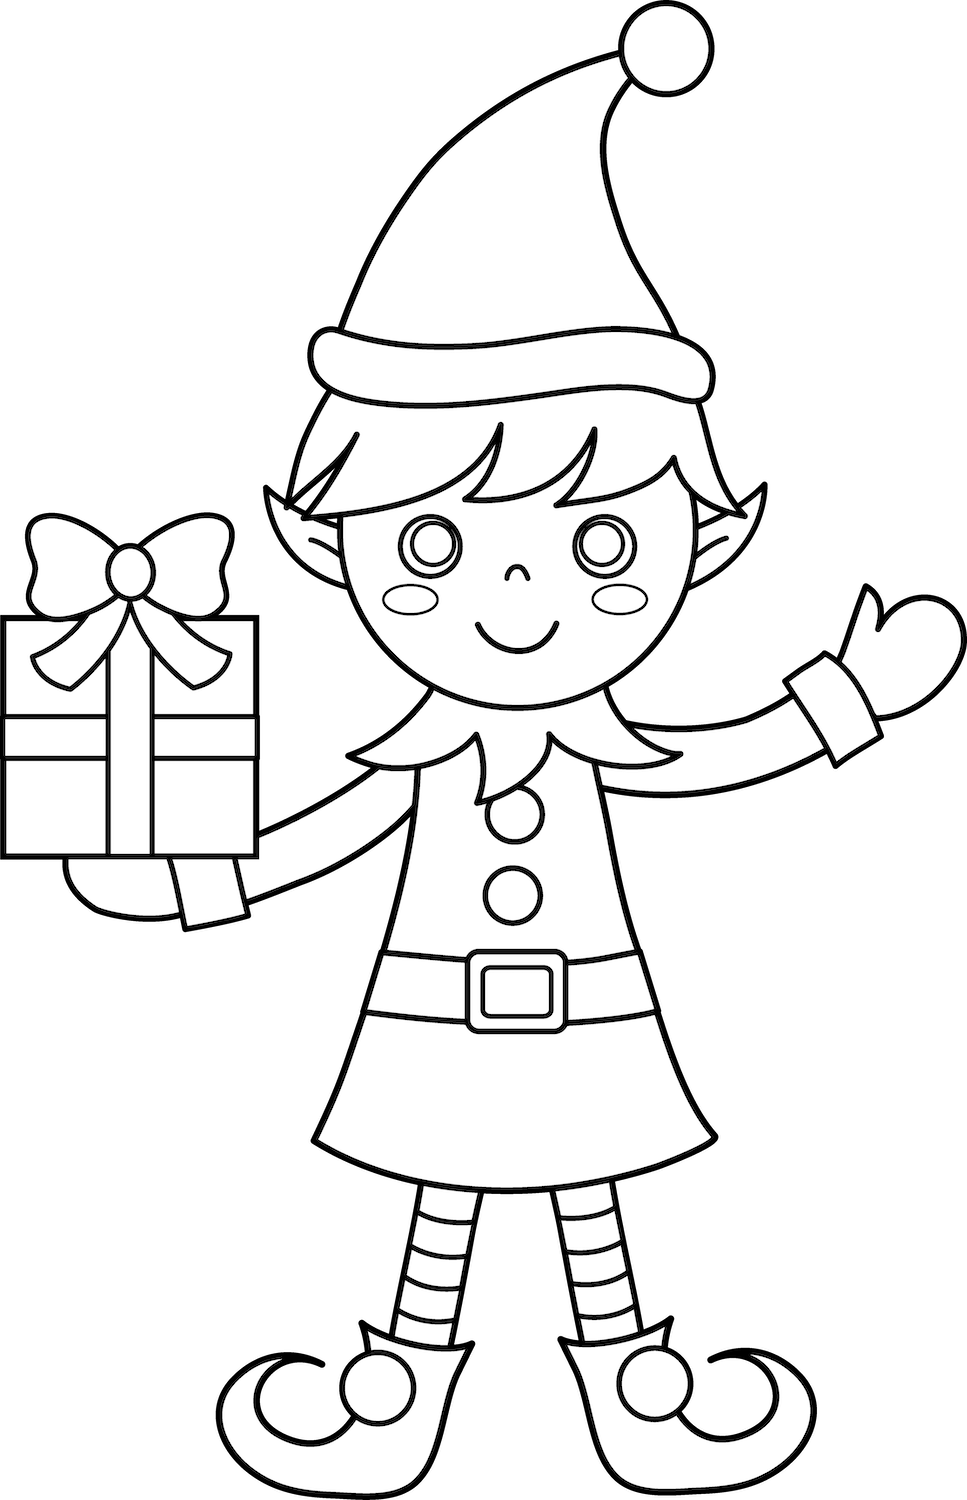 Christmas elf coloring page